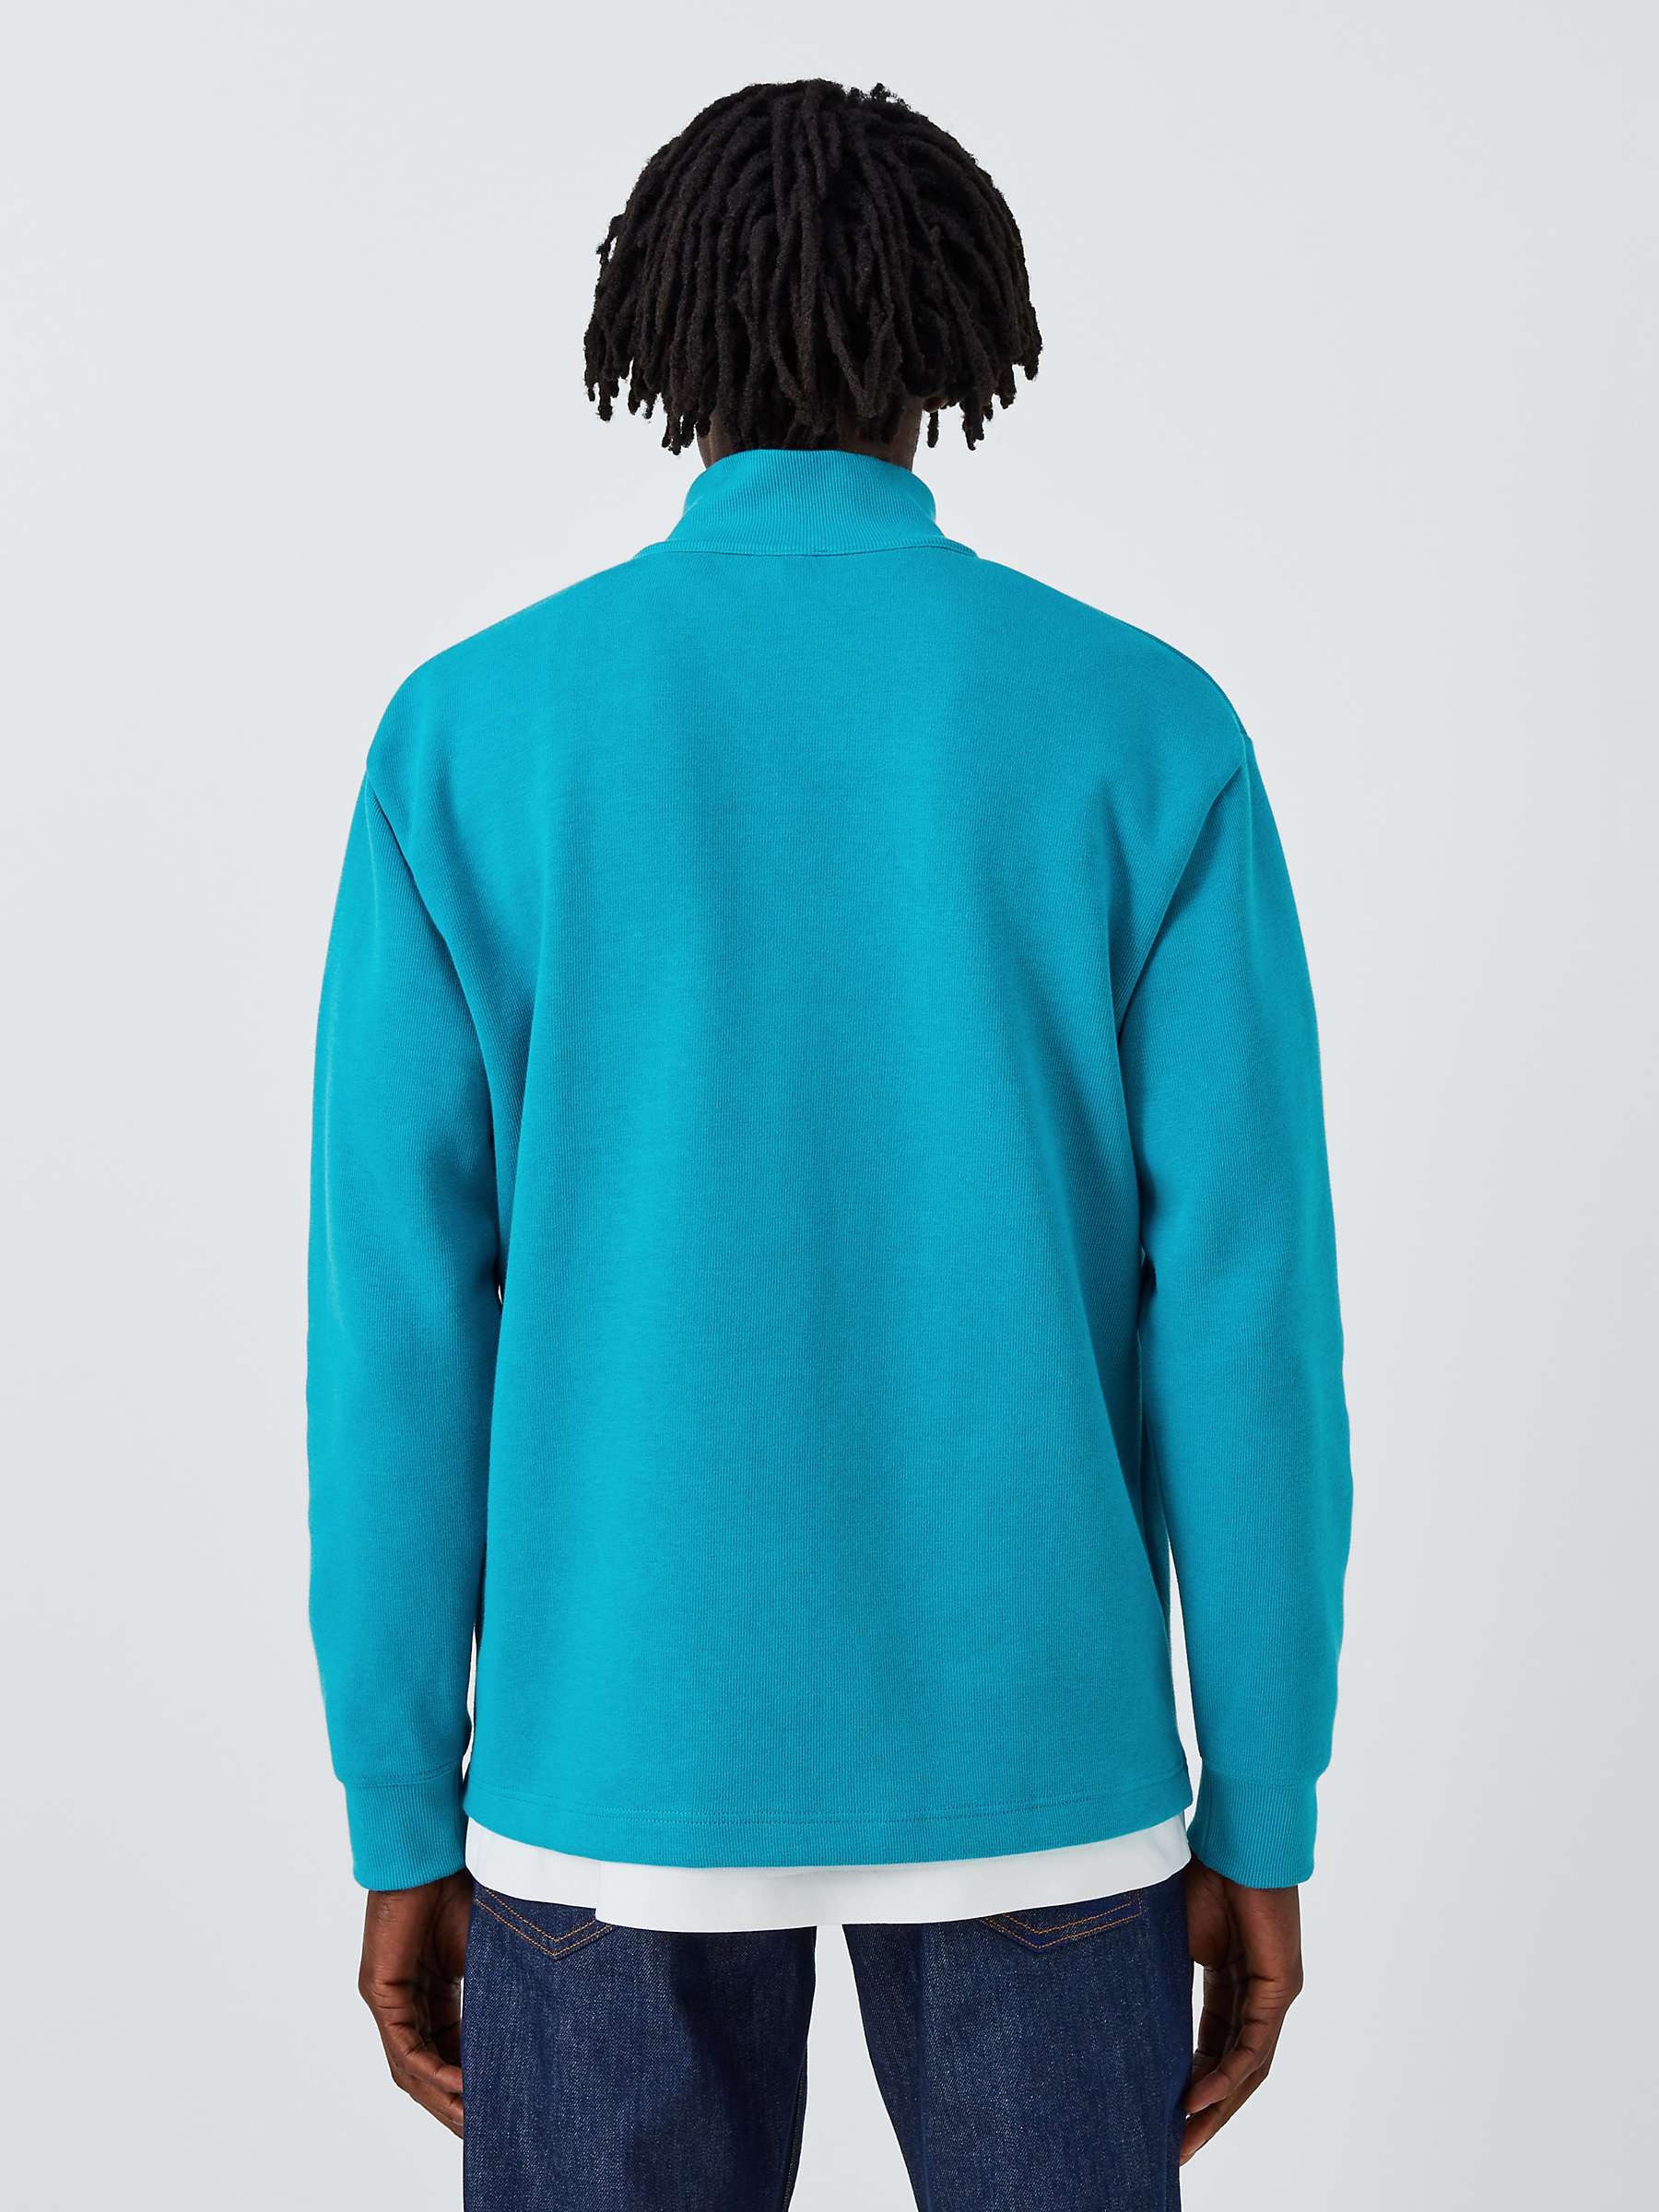 Buy Armor Lux Zipped Jumper, Blue Online at johnlewis.com